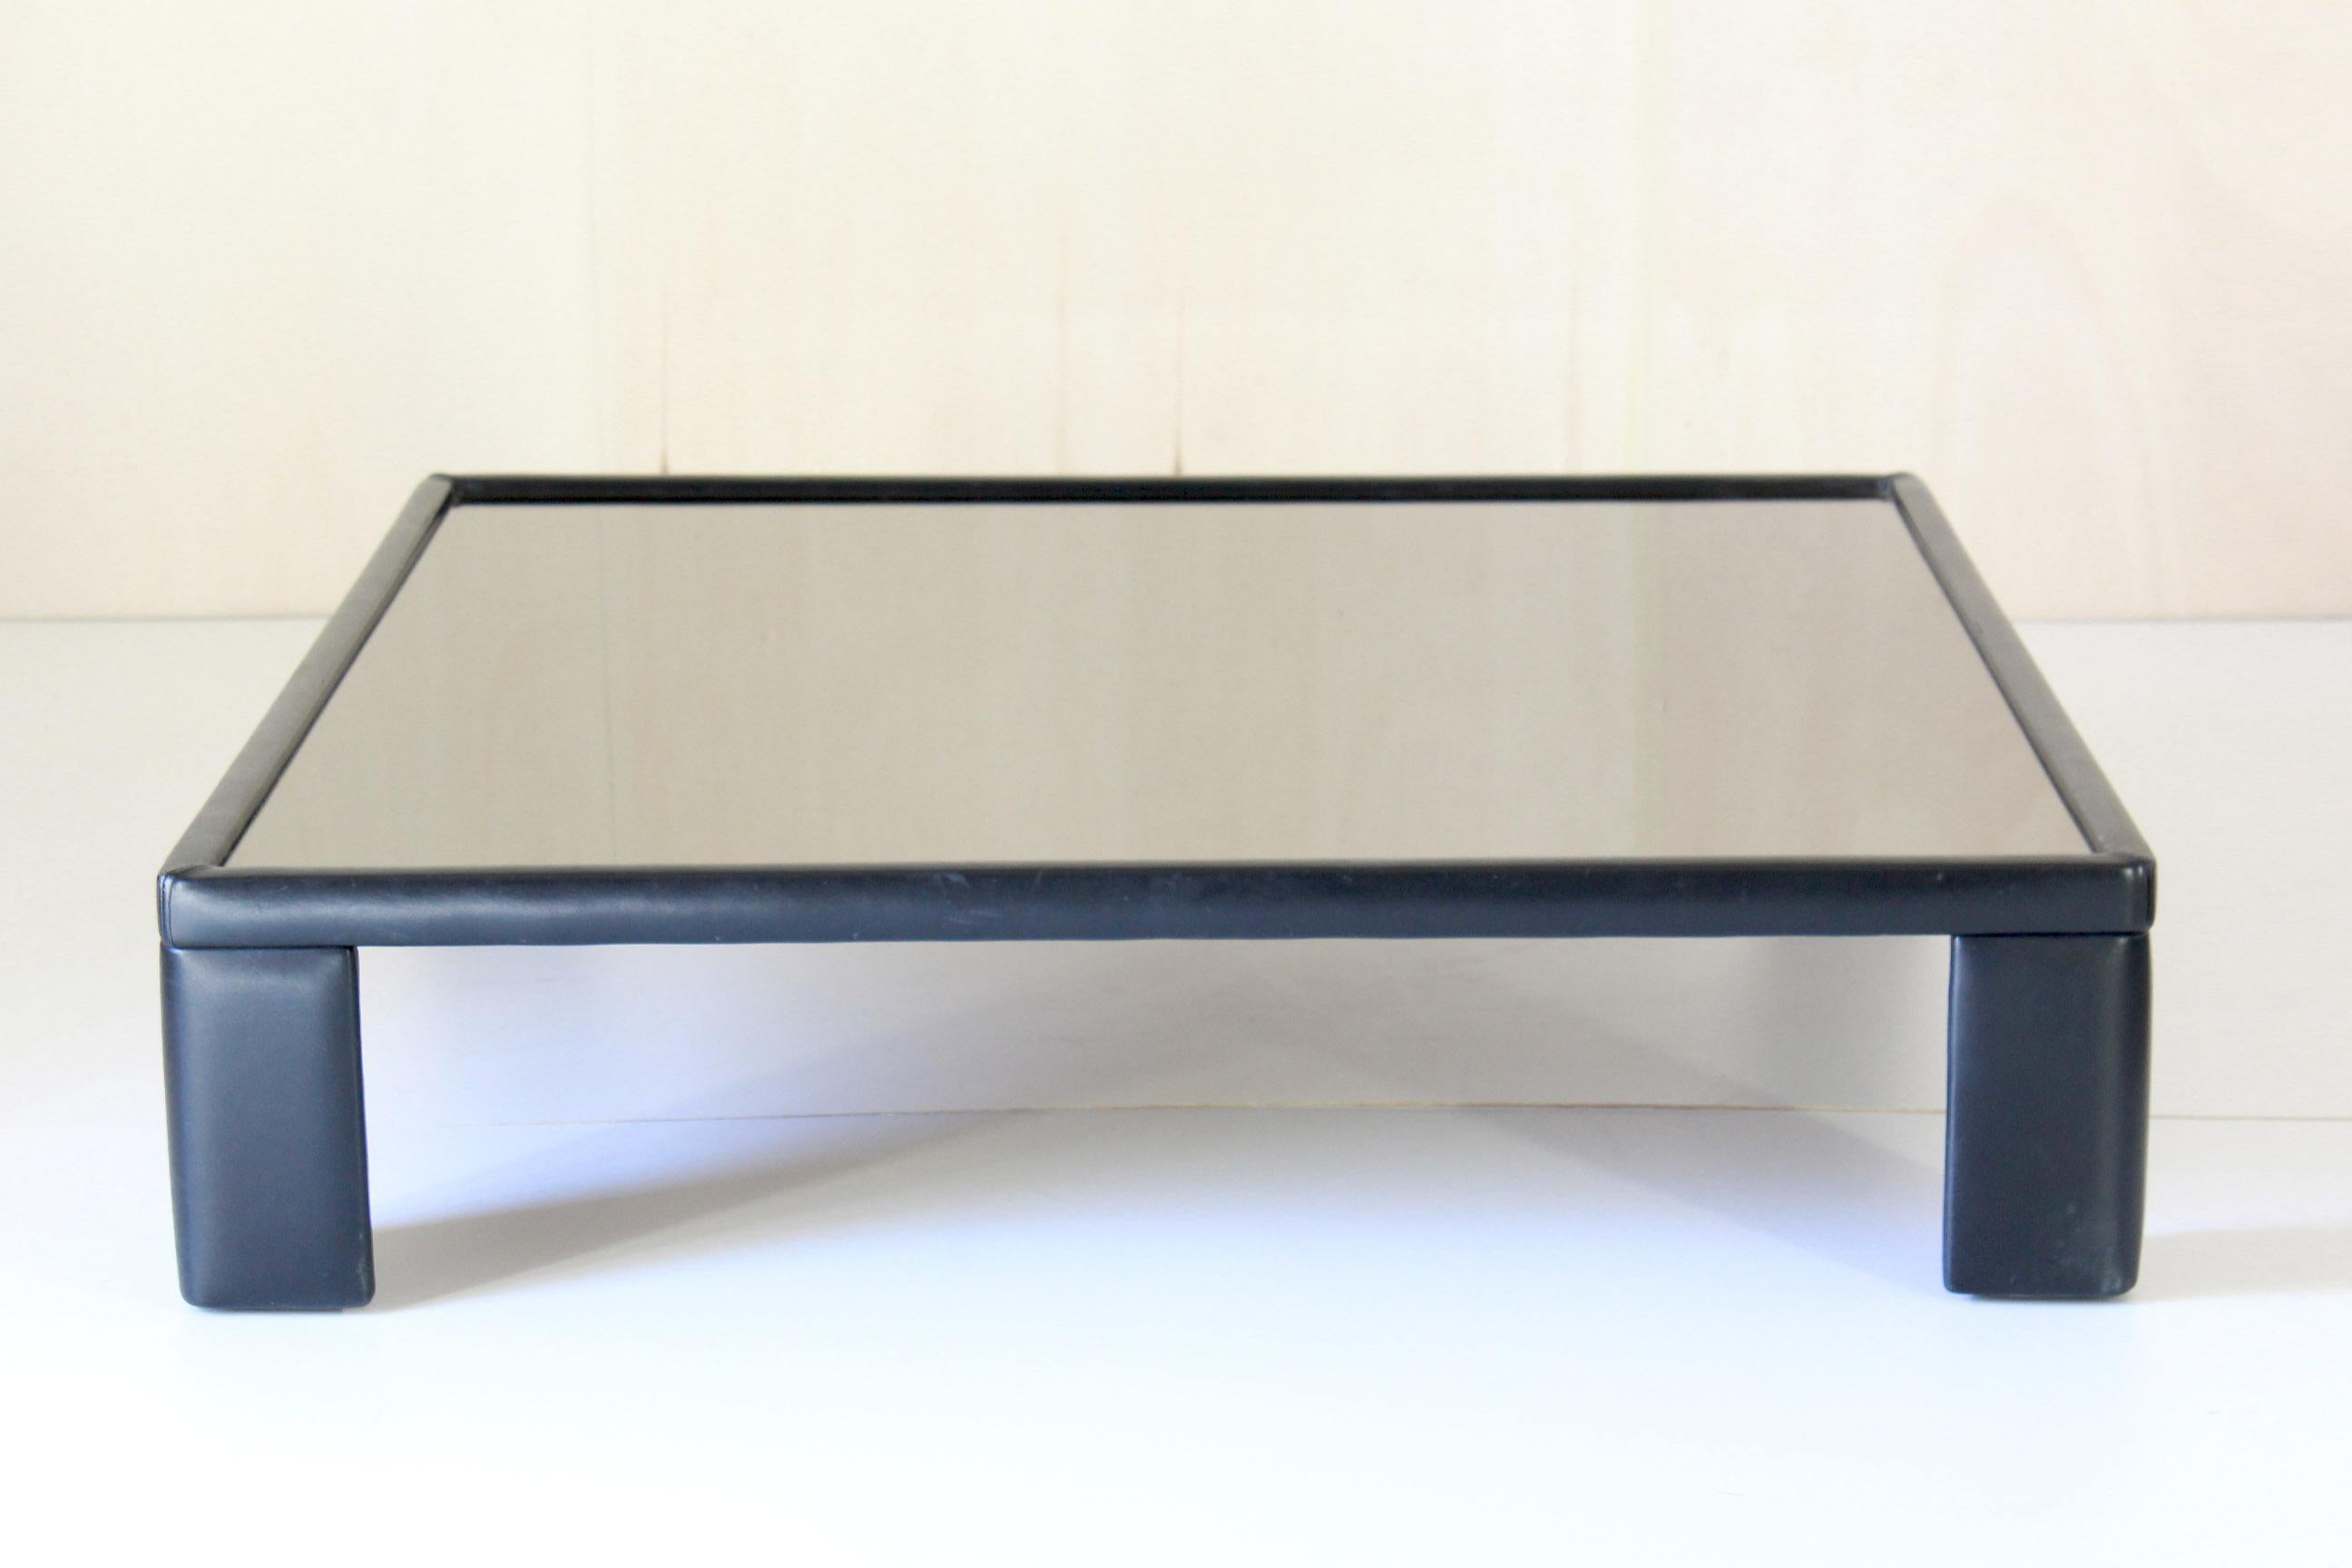 A vintage sofa table from the 1980s designed by Poltrona Frau, iconic design Italian factory.
The structure is covered in leather whilist the top is in fine mirror glass. In very good conditions with some sign of time.